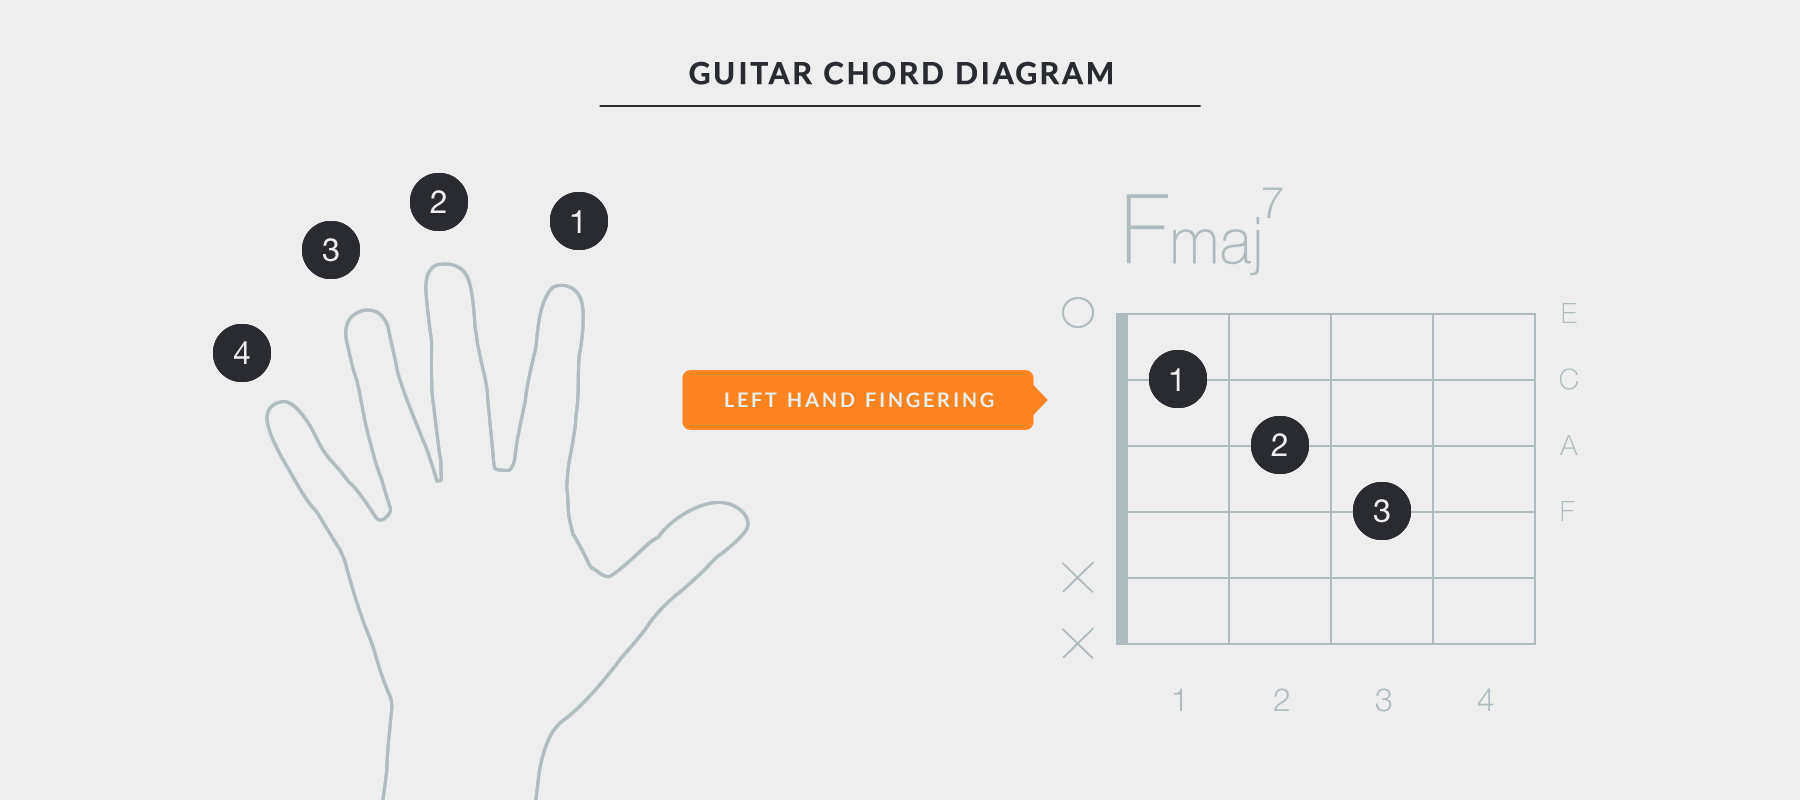 How To Play Guitar Chords 10 Tips How To Play The Guitar With Good Technique